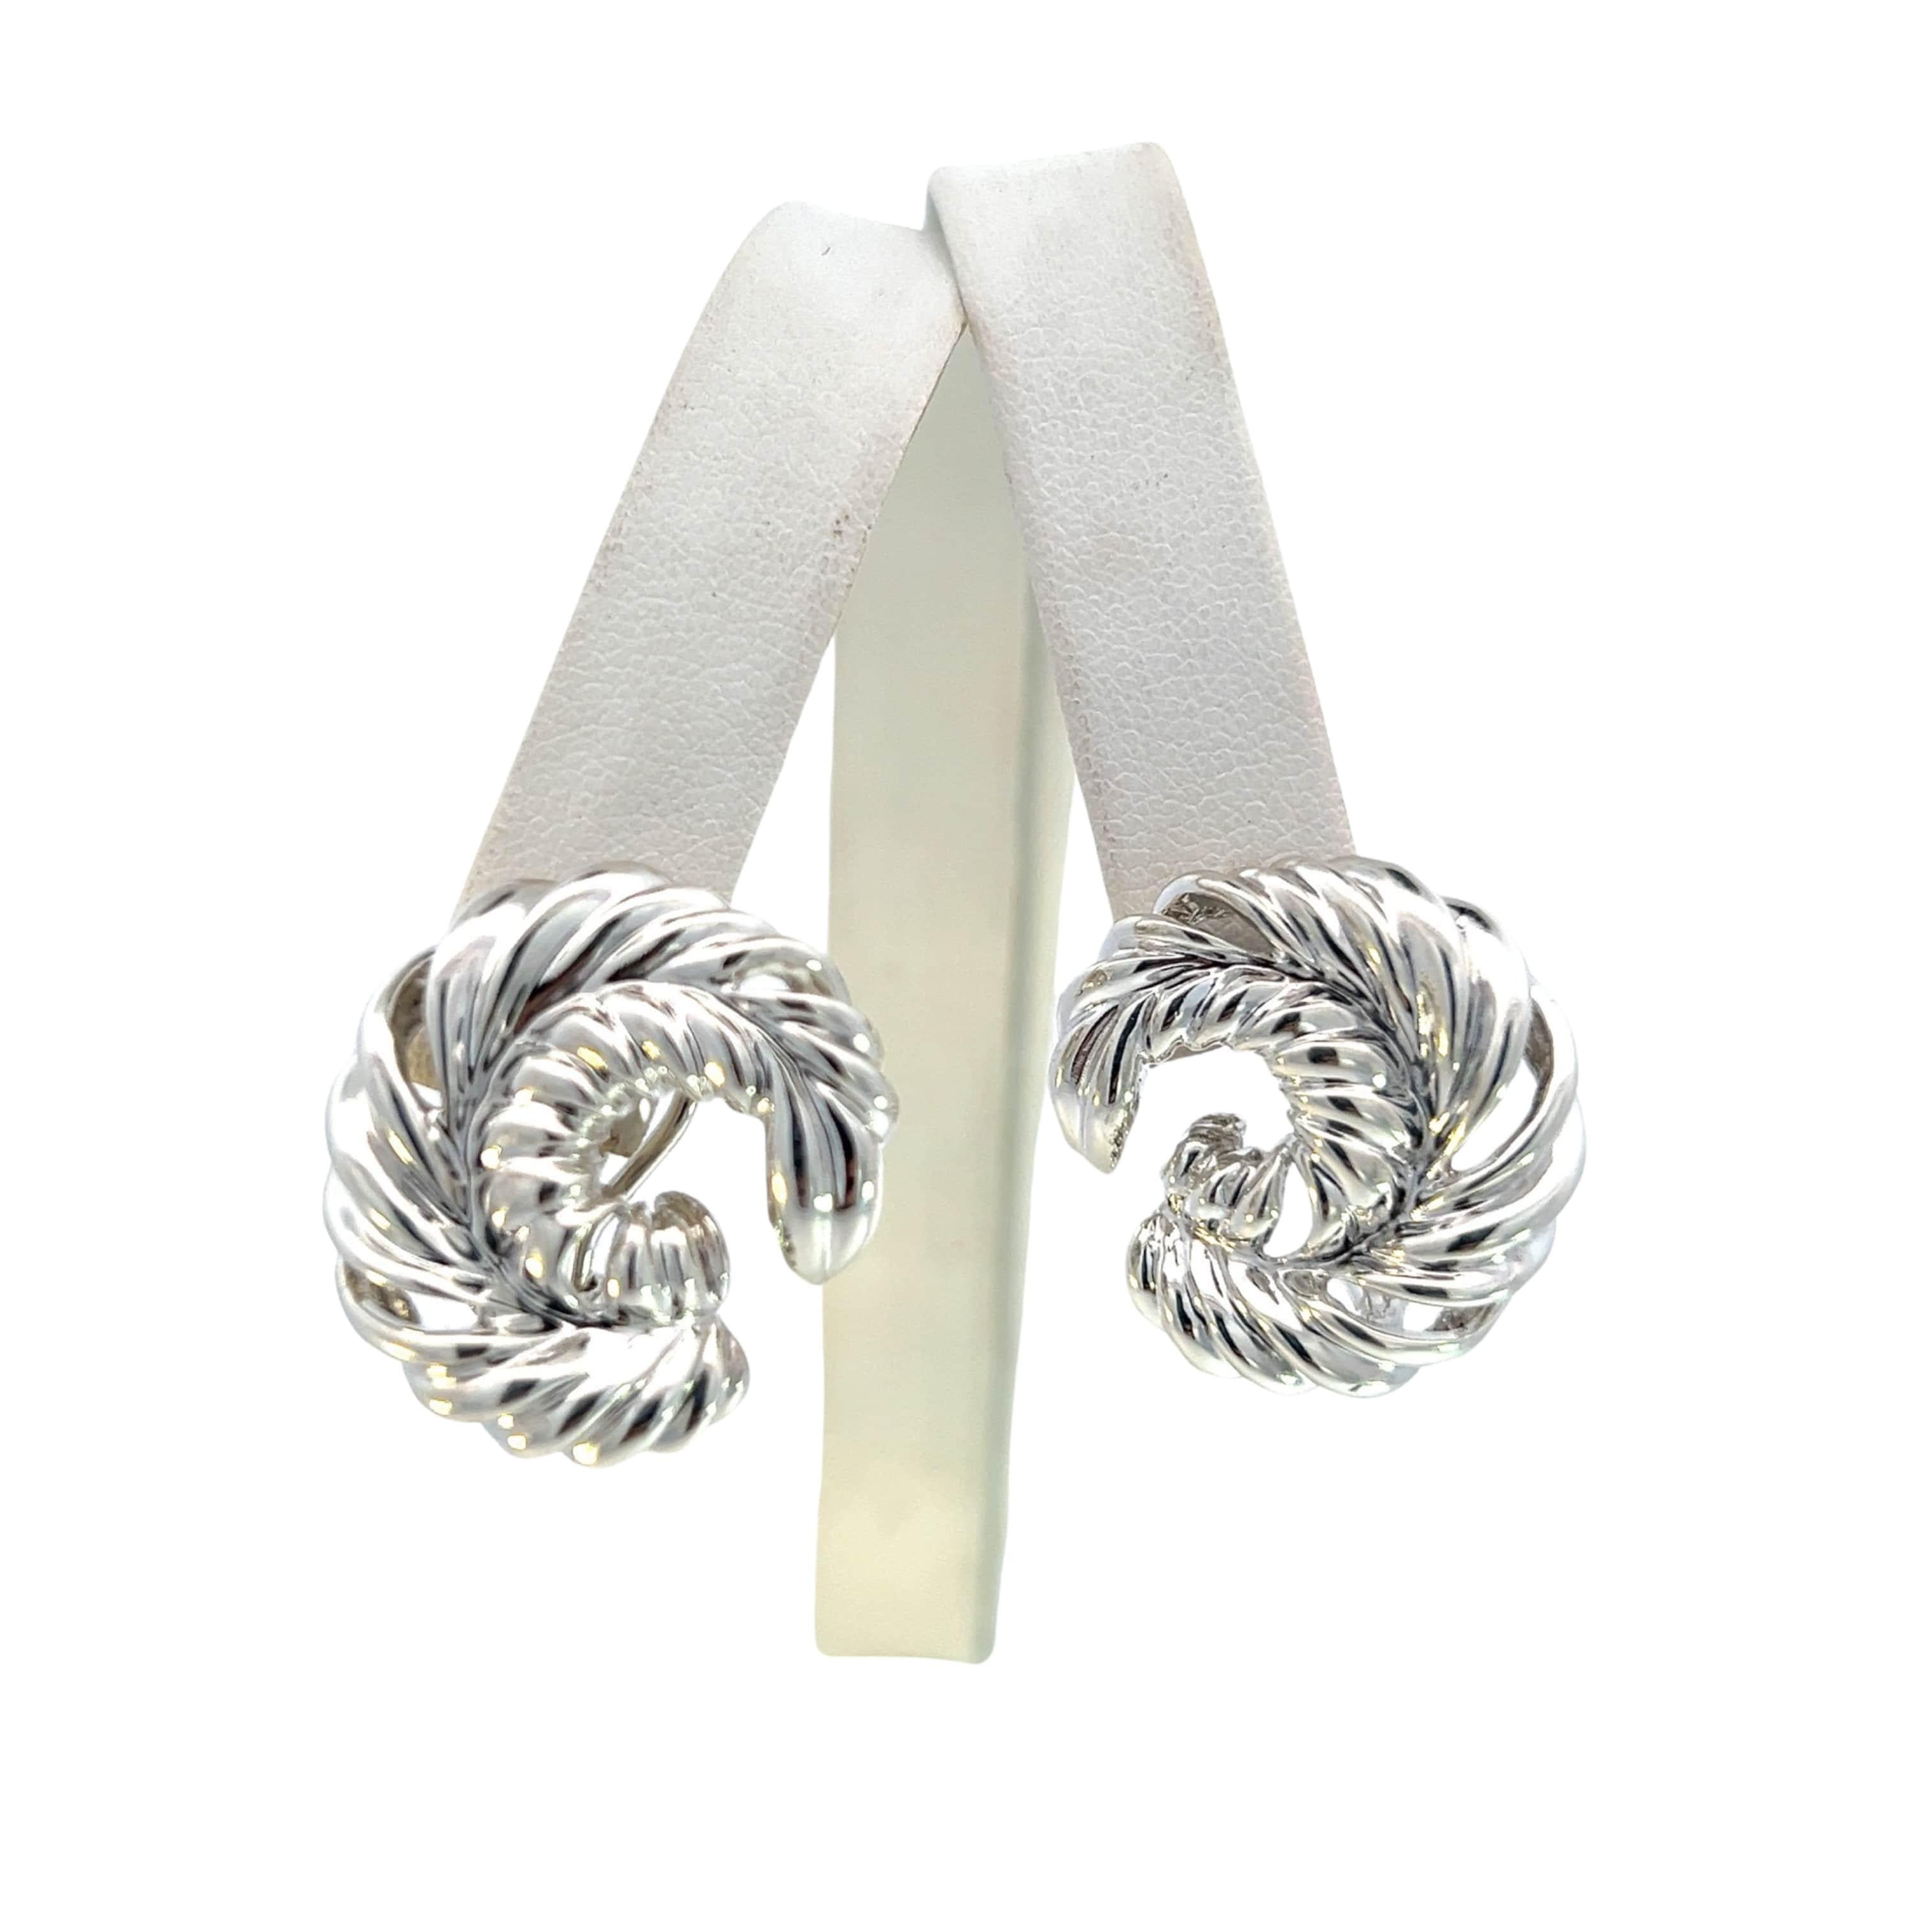 Magnificent Tiffany & Co Estate Clip-on Earrings Silver TIF514

These elegant Authentic Tiffany & Co earrings are made of sterling silver and have a weight of 10 grams.

TRUSTED SELLER SINCE 2002

PLEASE SEE OUR HUNDREDS OF POSITIVE FEEDBACKS FROM